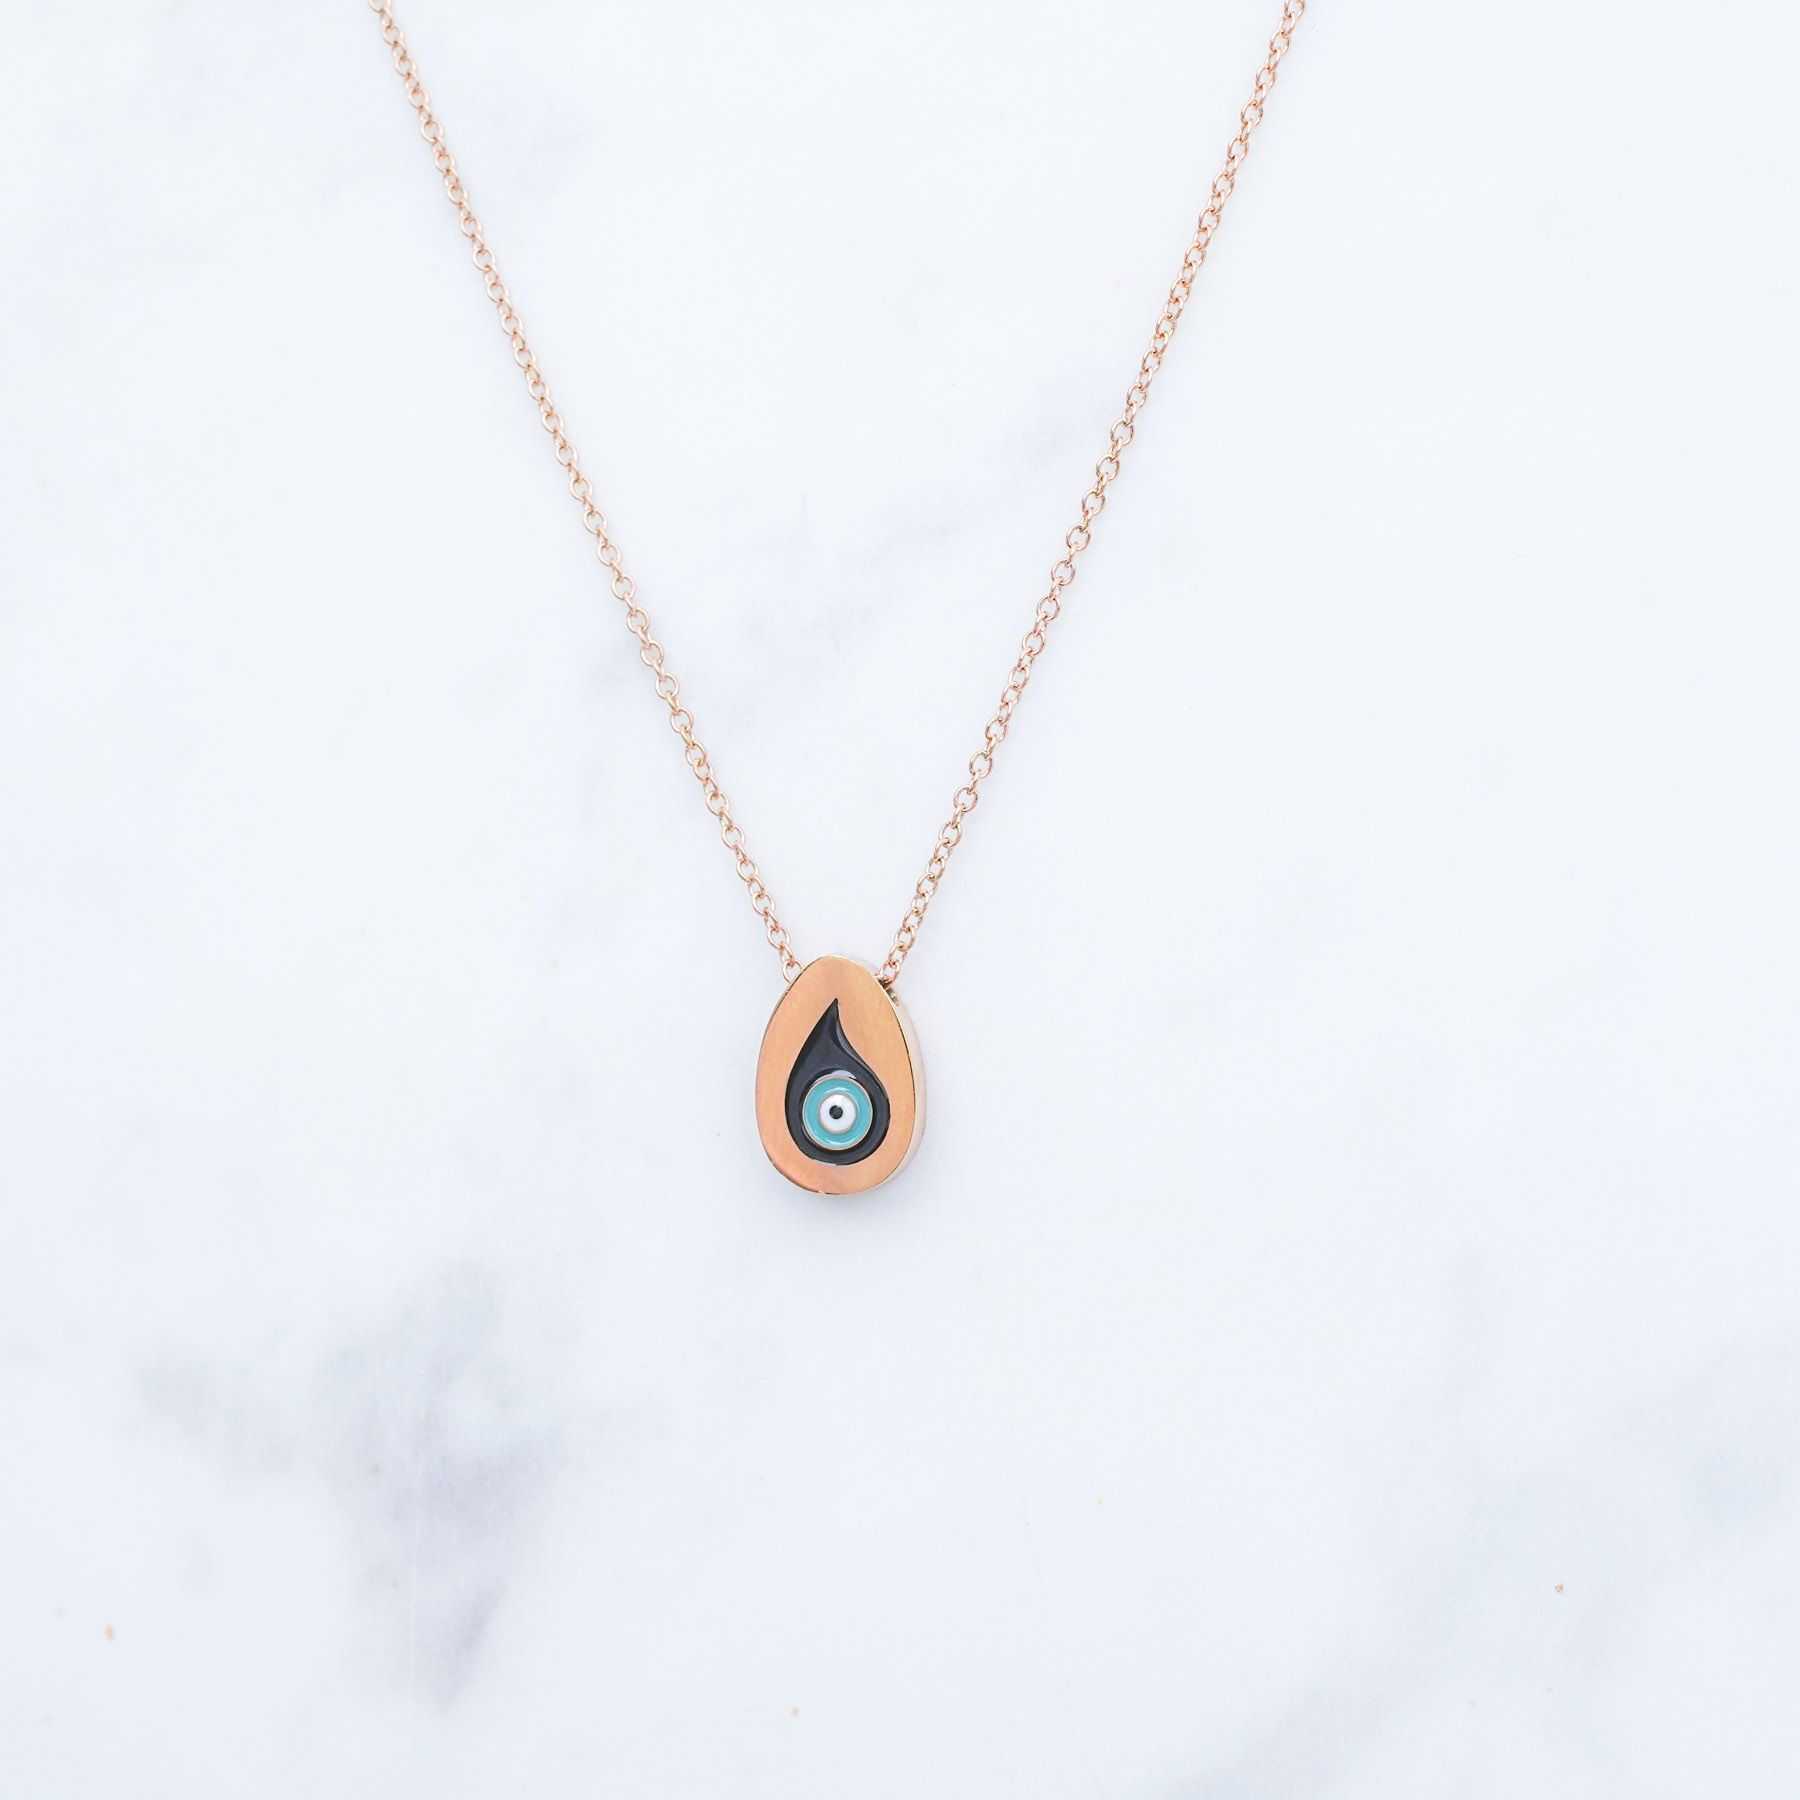 GOOD LUCK NECKLACE - ROSE GOLD 